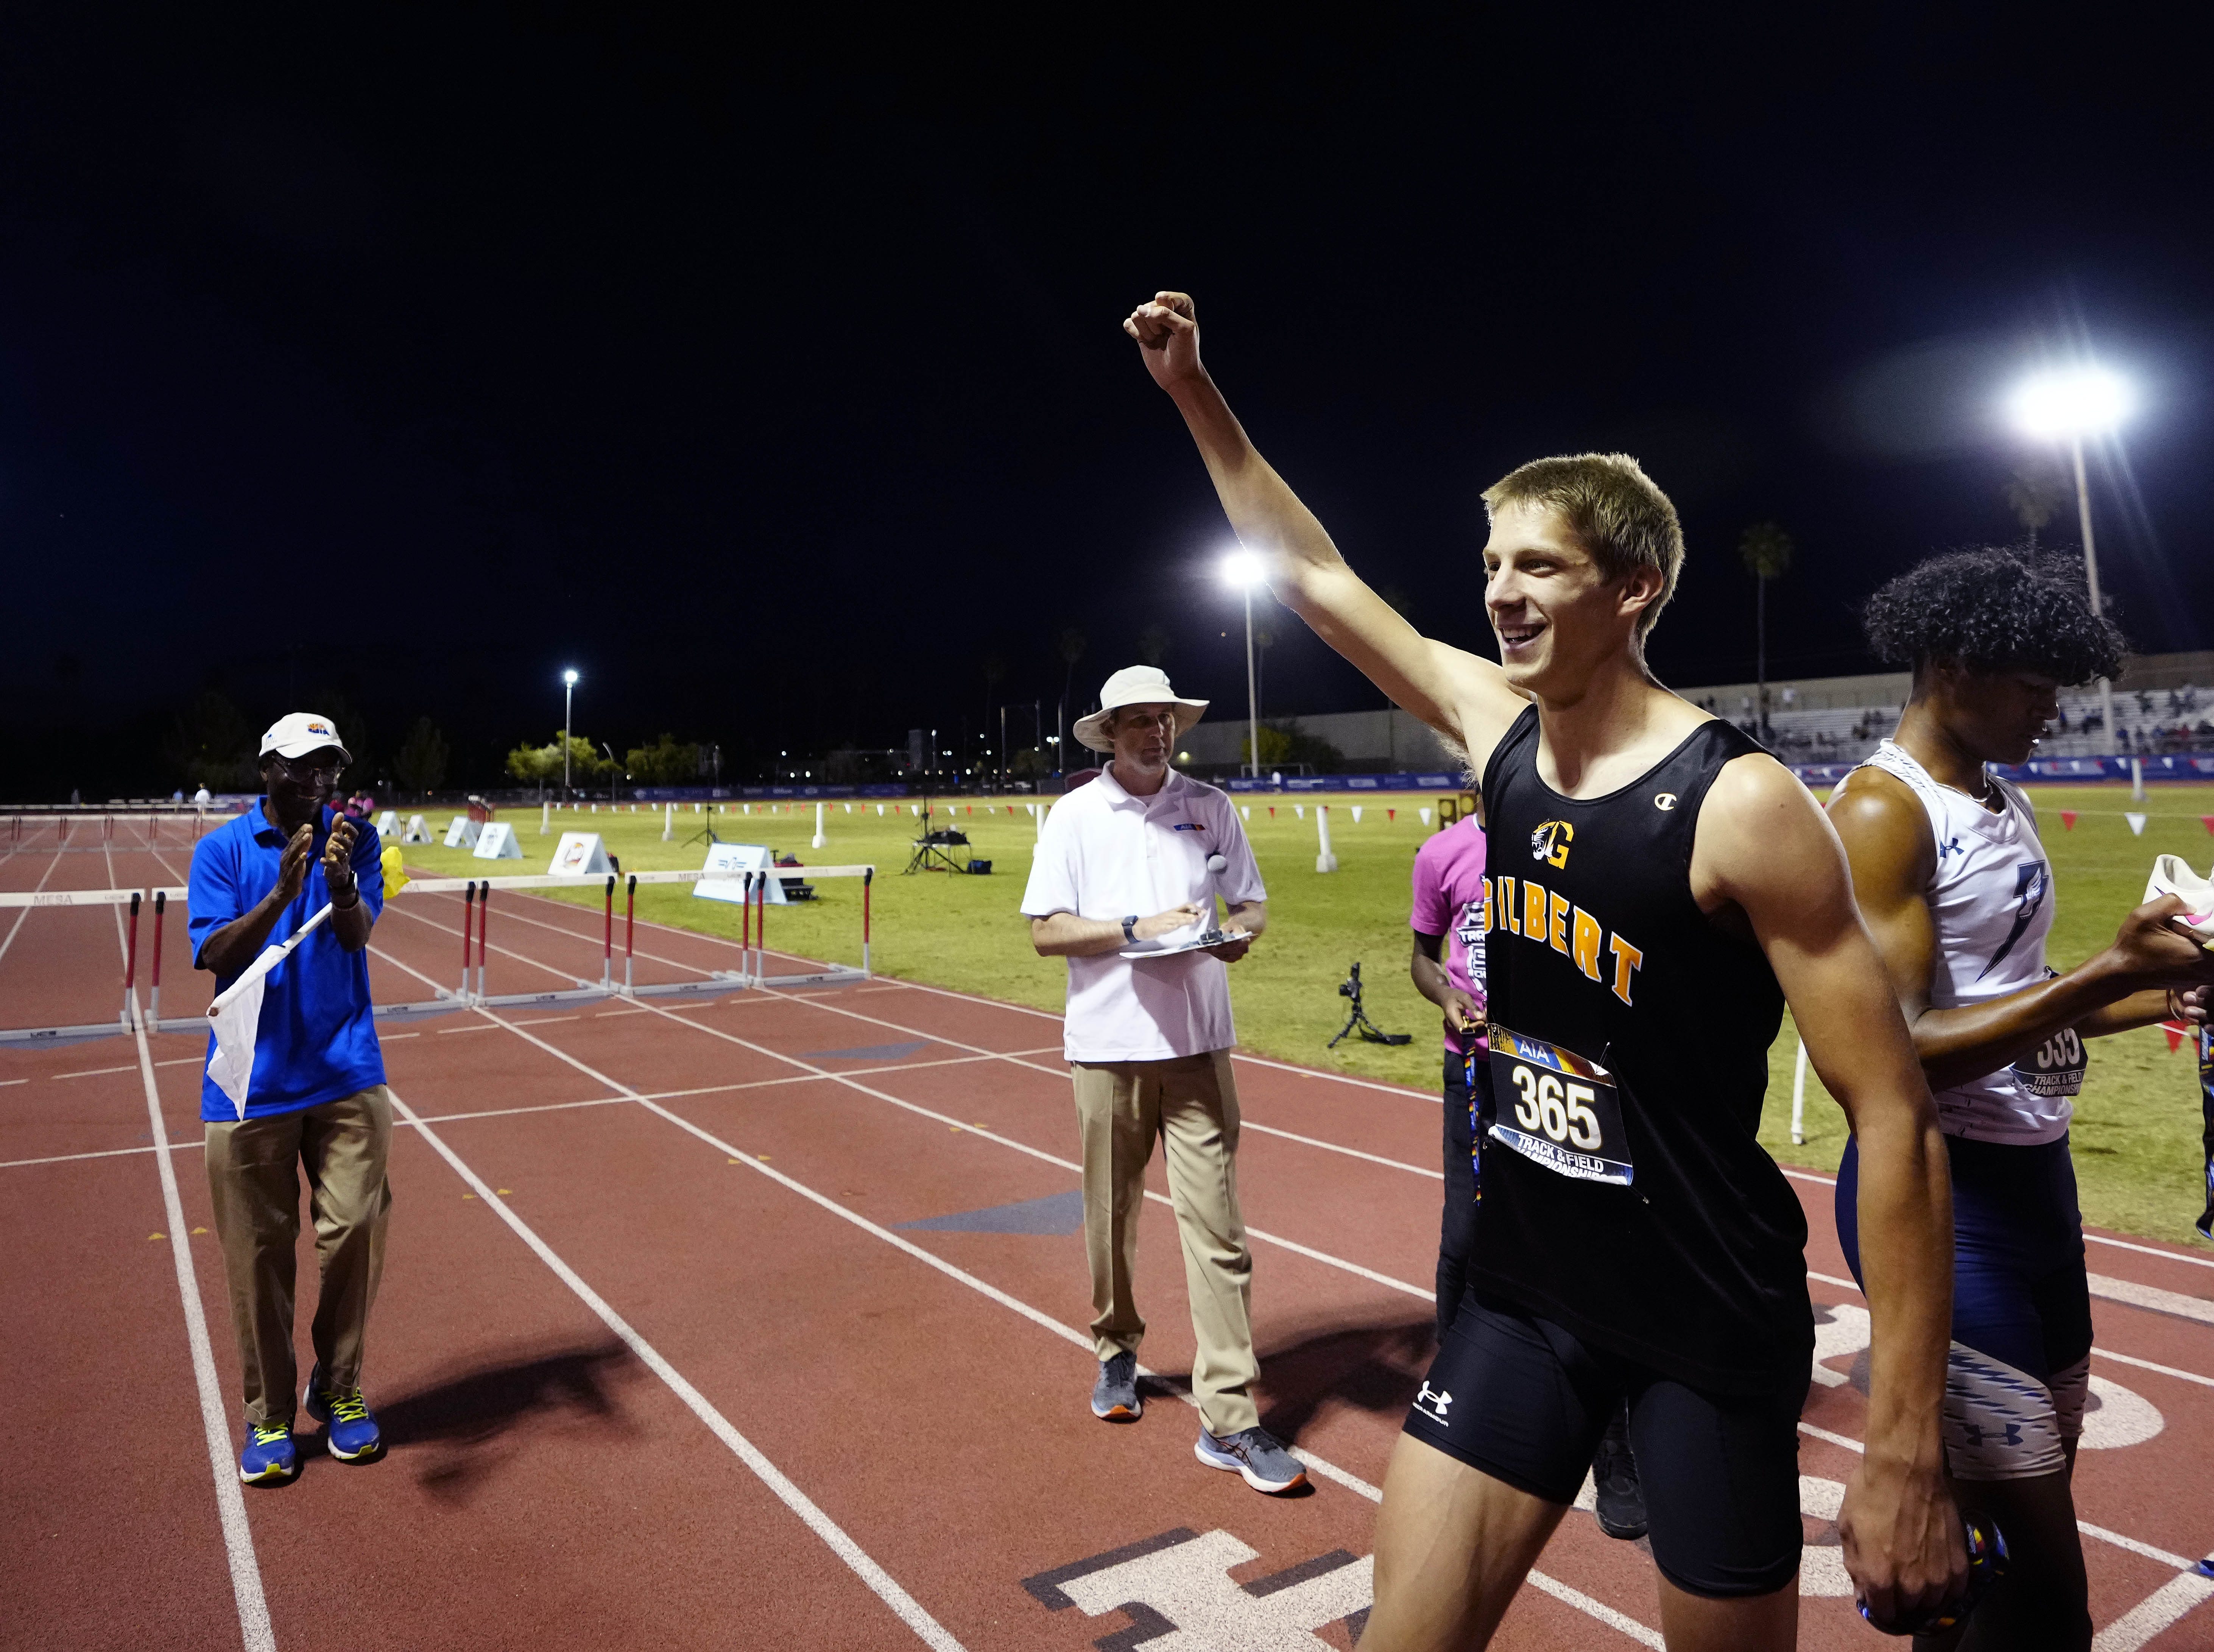 Vance Nilsson, U.S. high school record-holder in the 300M hurdles, commits to Florida